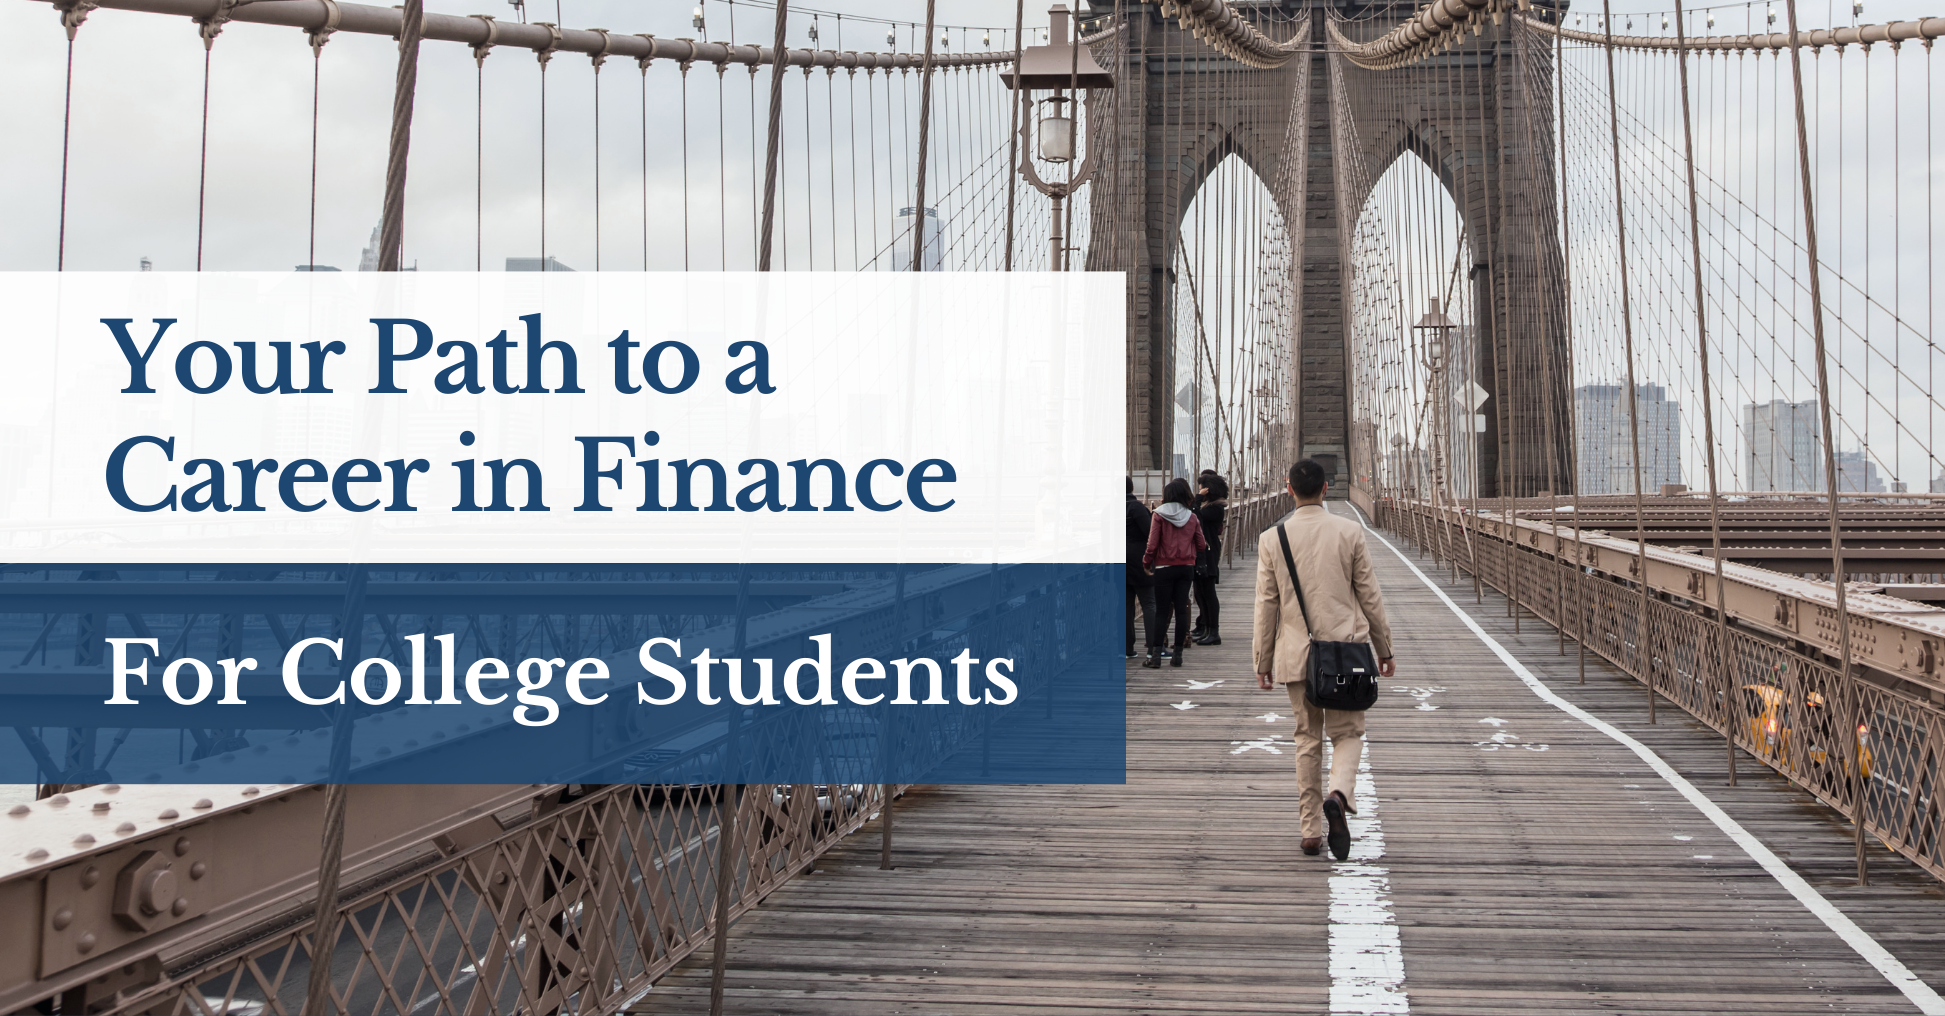 Your Path to a Career in Finance